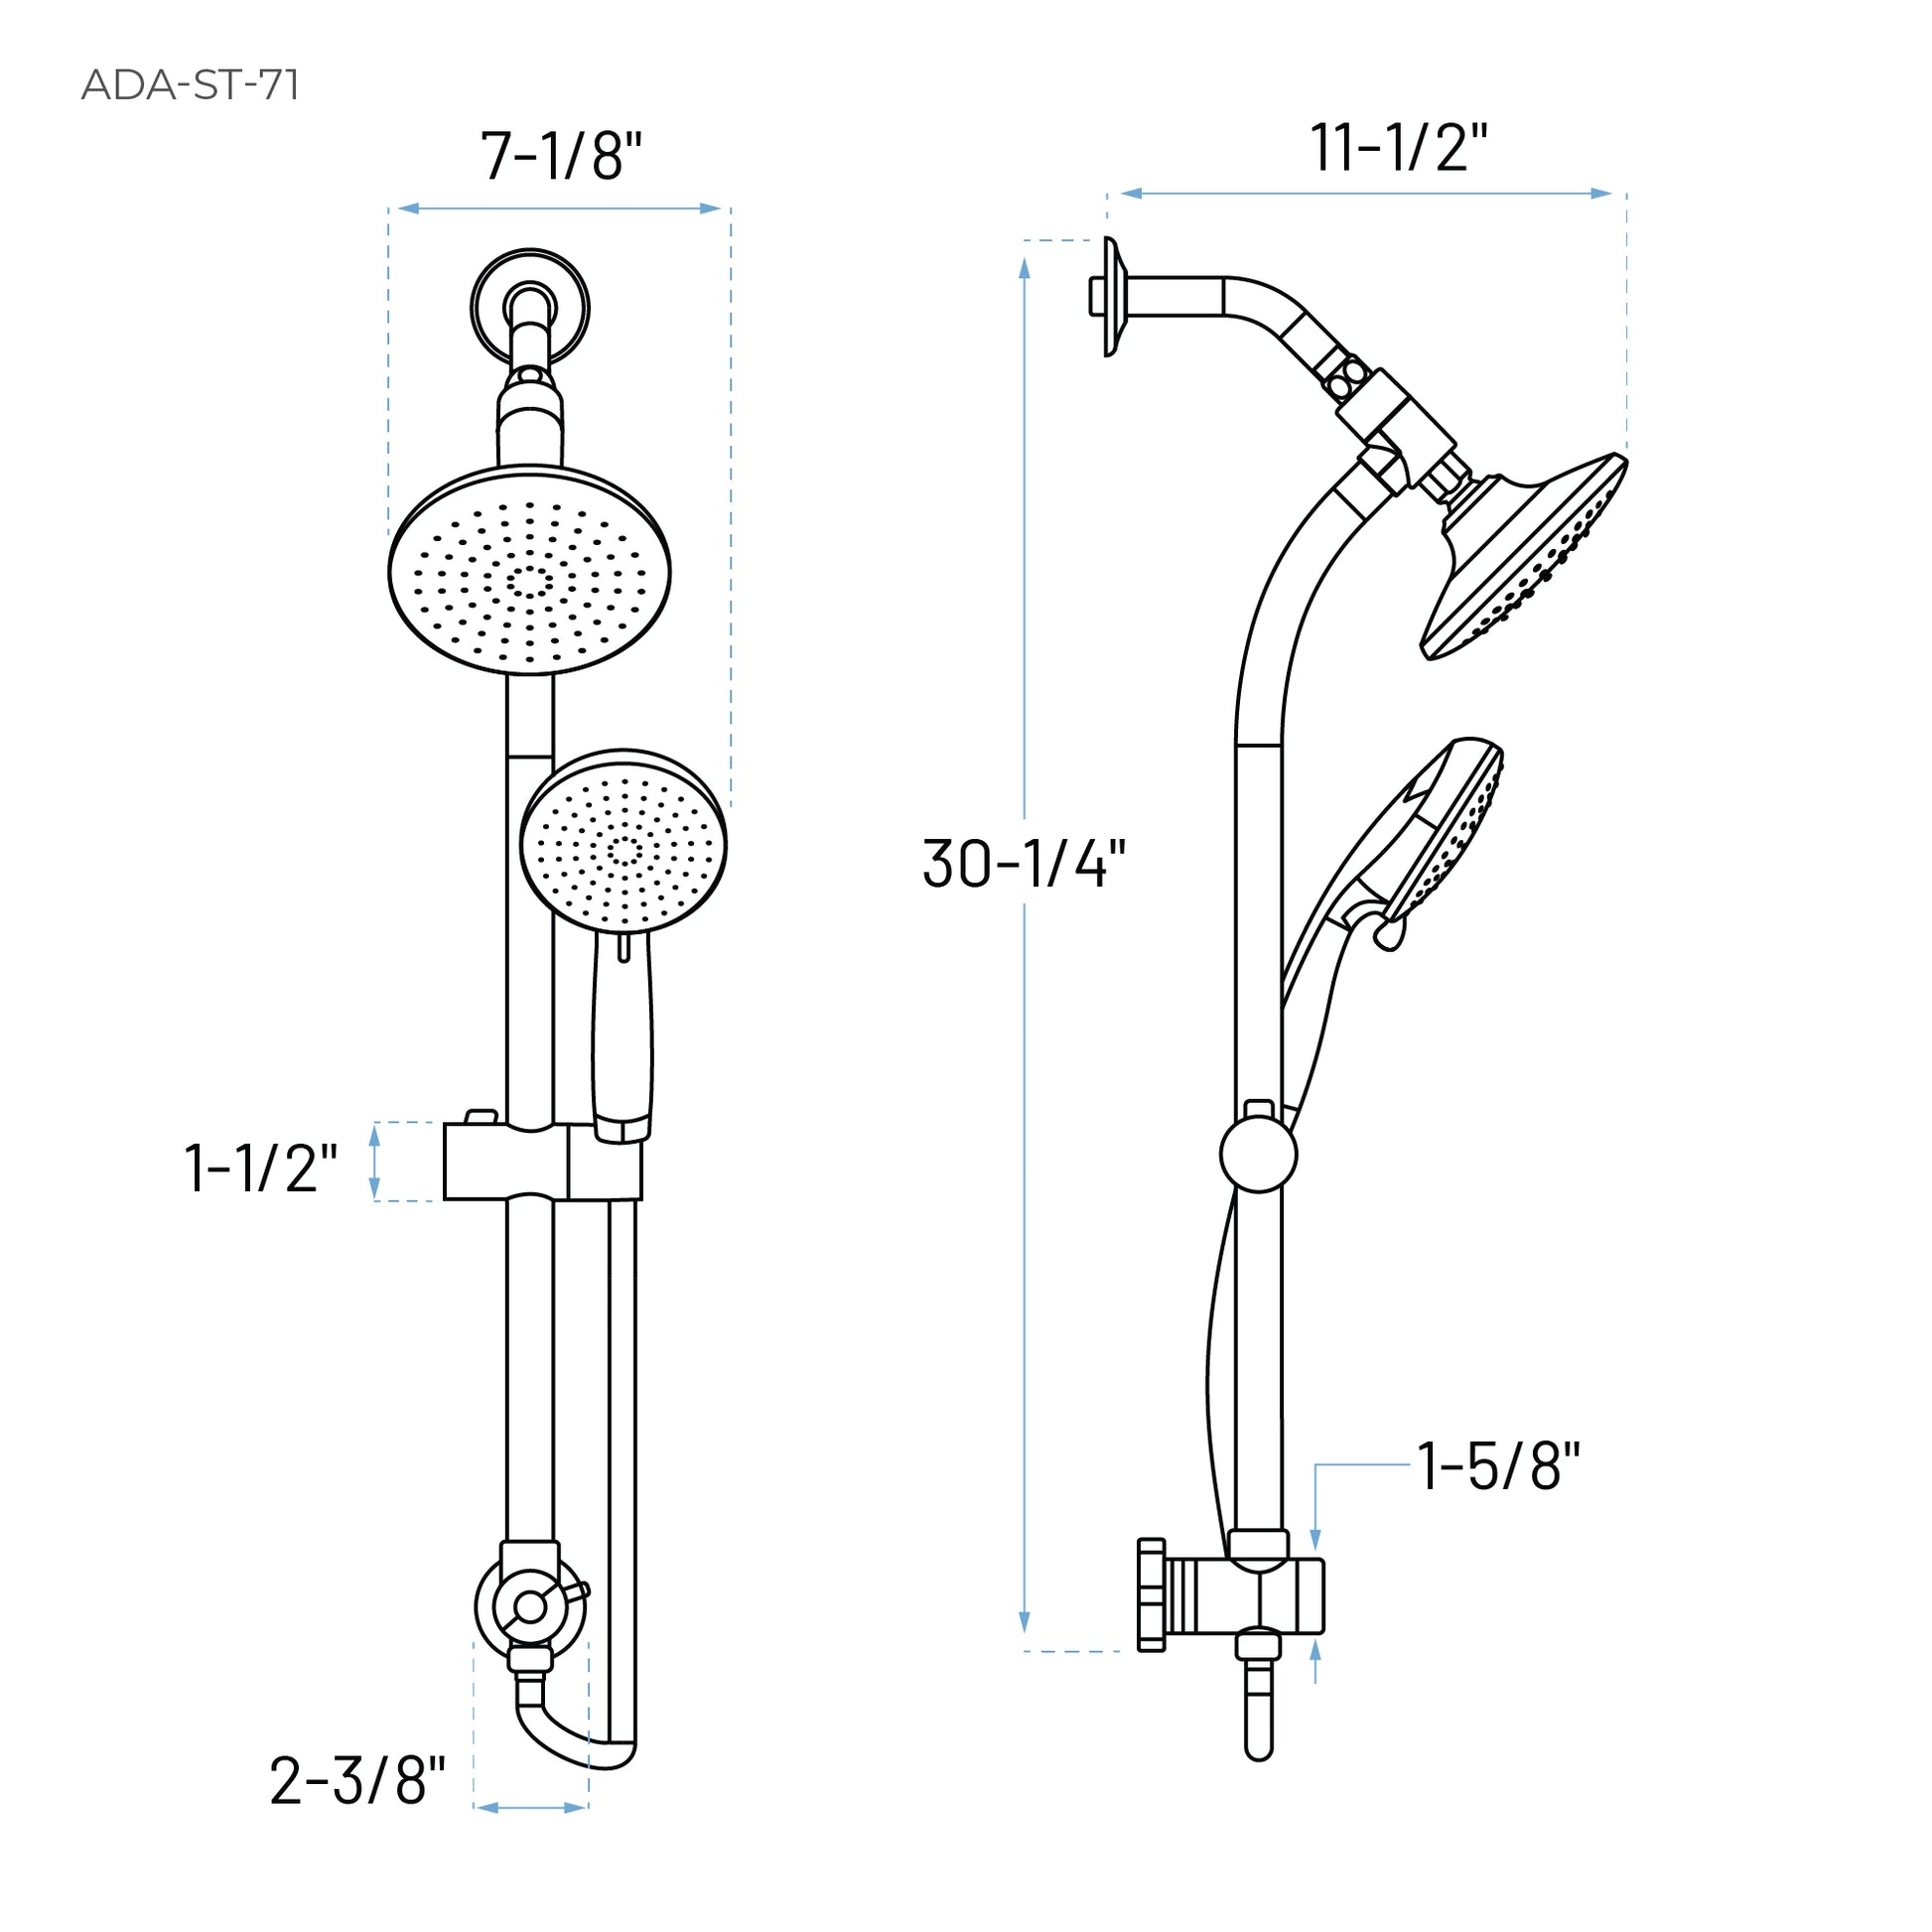 Technical Drawing of a Multi Function Dual Shower Head with Slide Bar